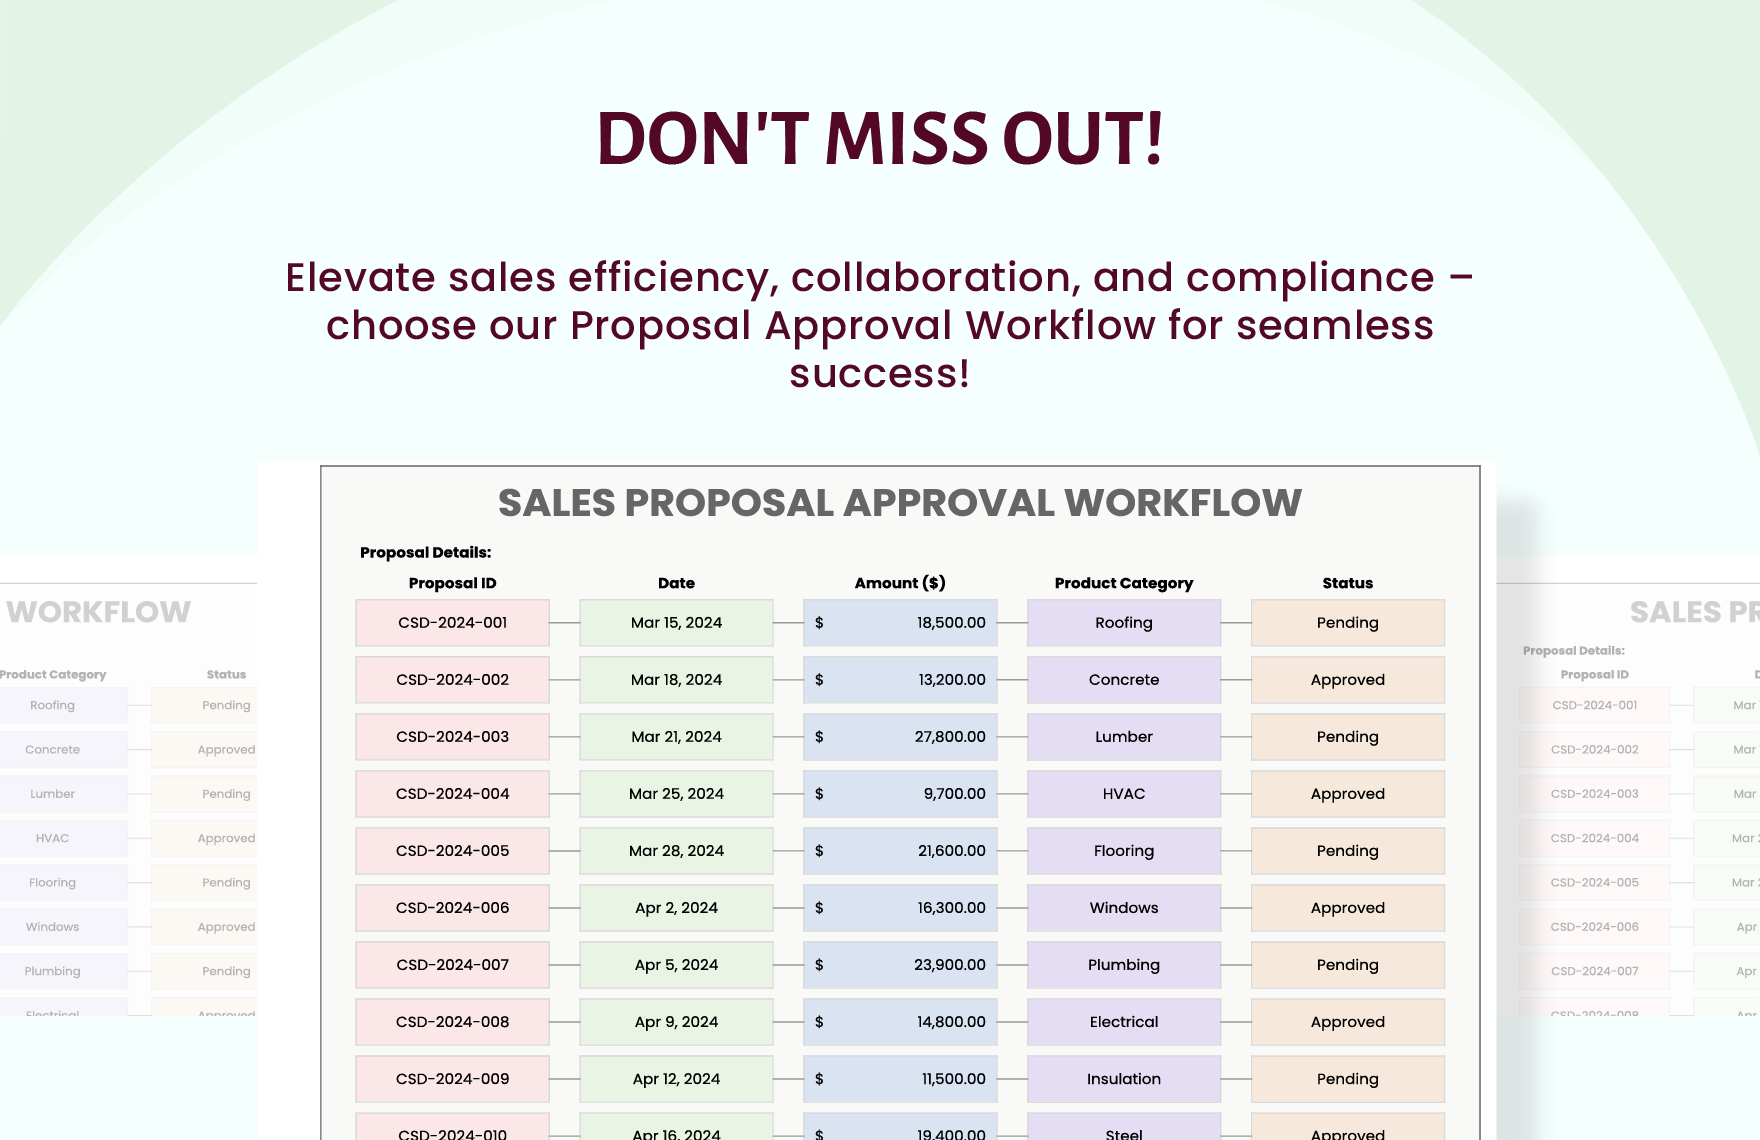 Sales Proposal Approval Workflow Template